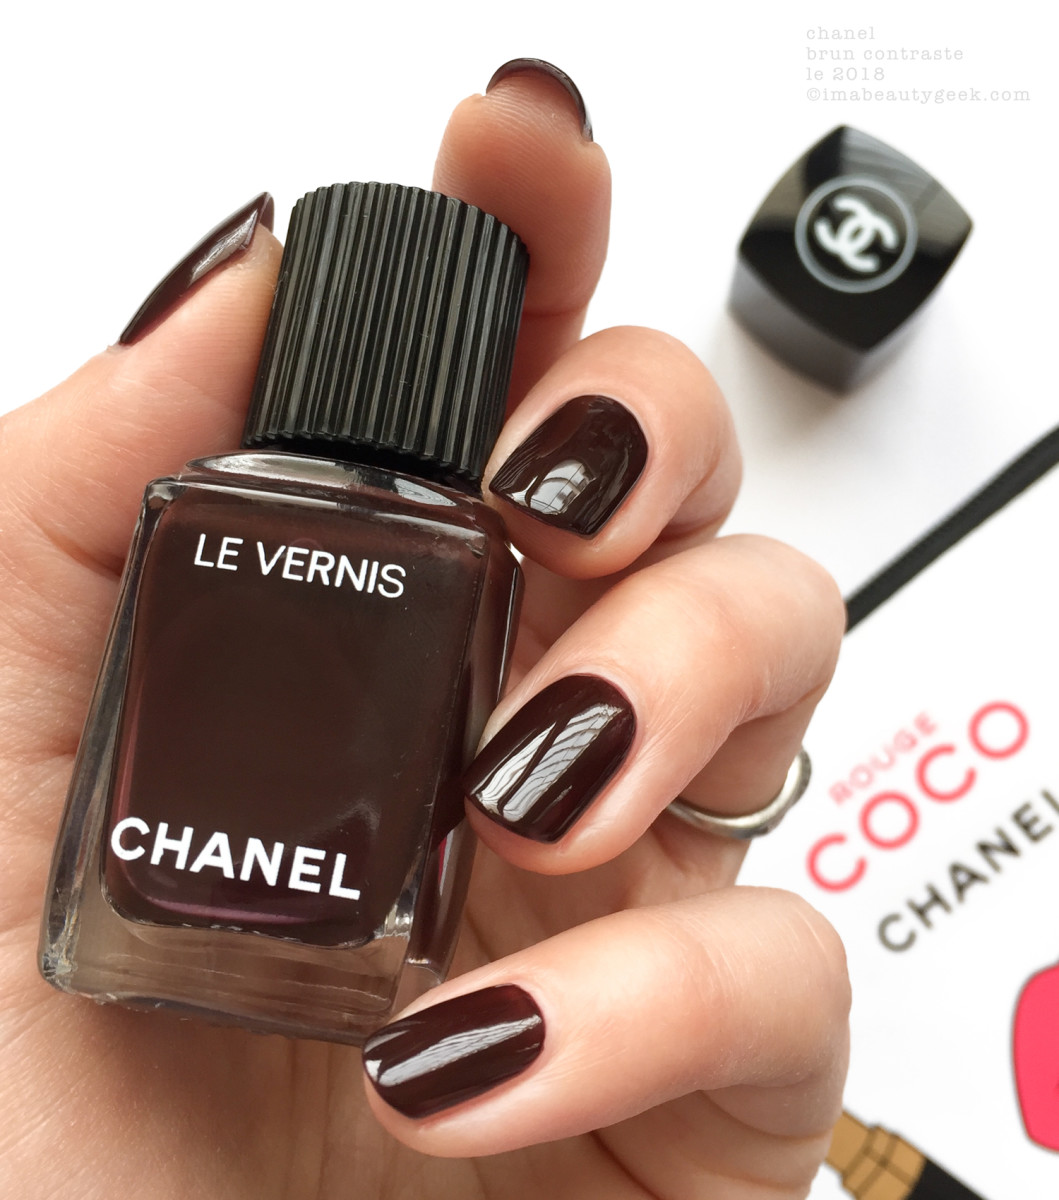 miles Med venlig hilsen kop CHANEL LE VERNIS SPRING 2018 SWATCHES + LIMITED EDITIONS - Beautygeeks